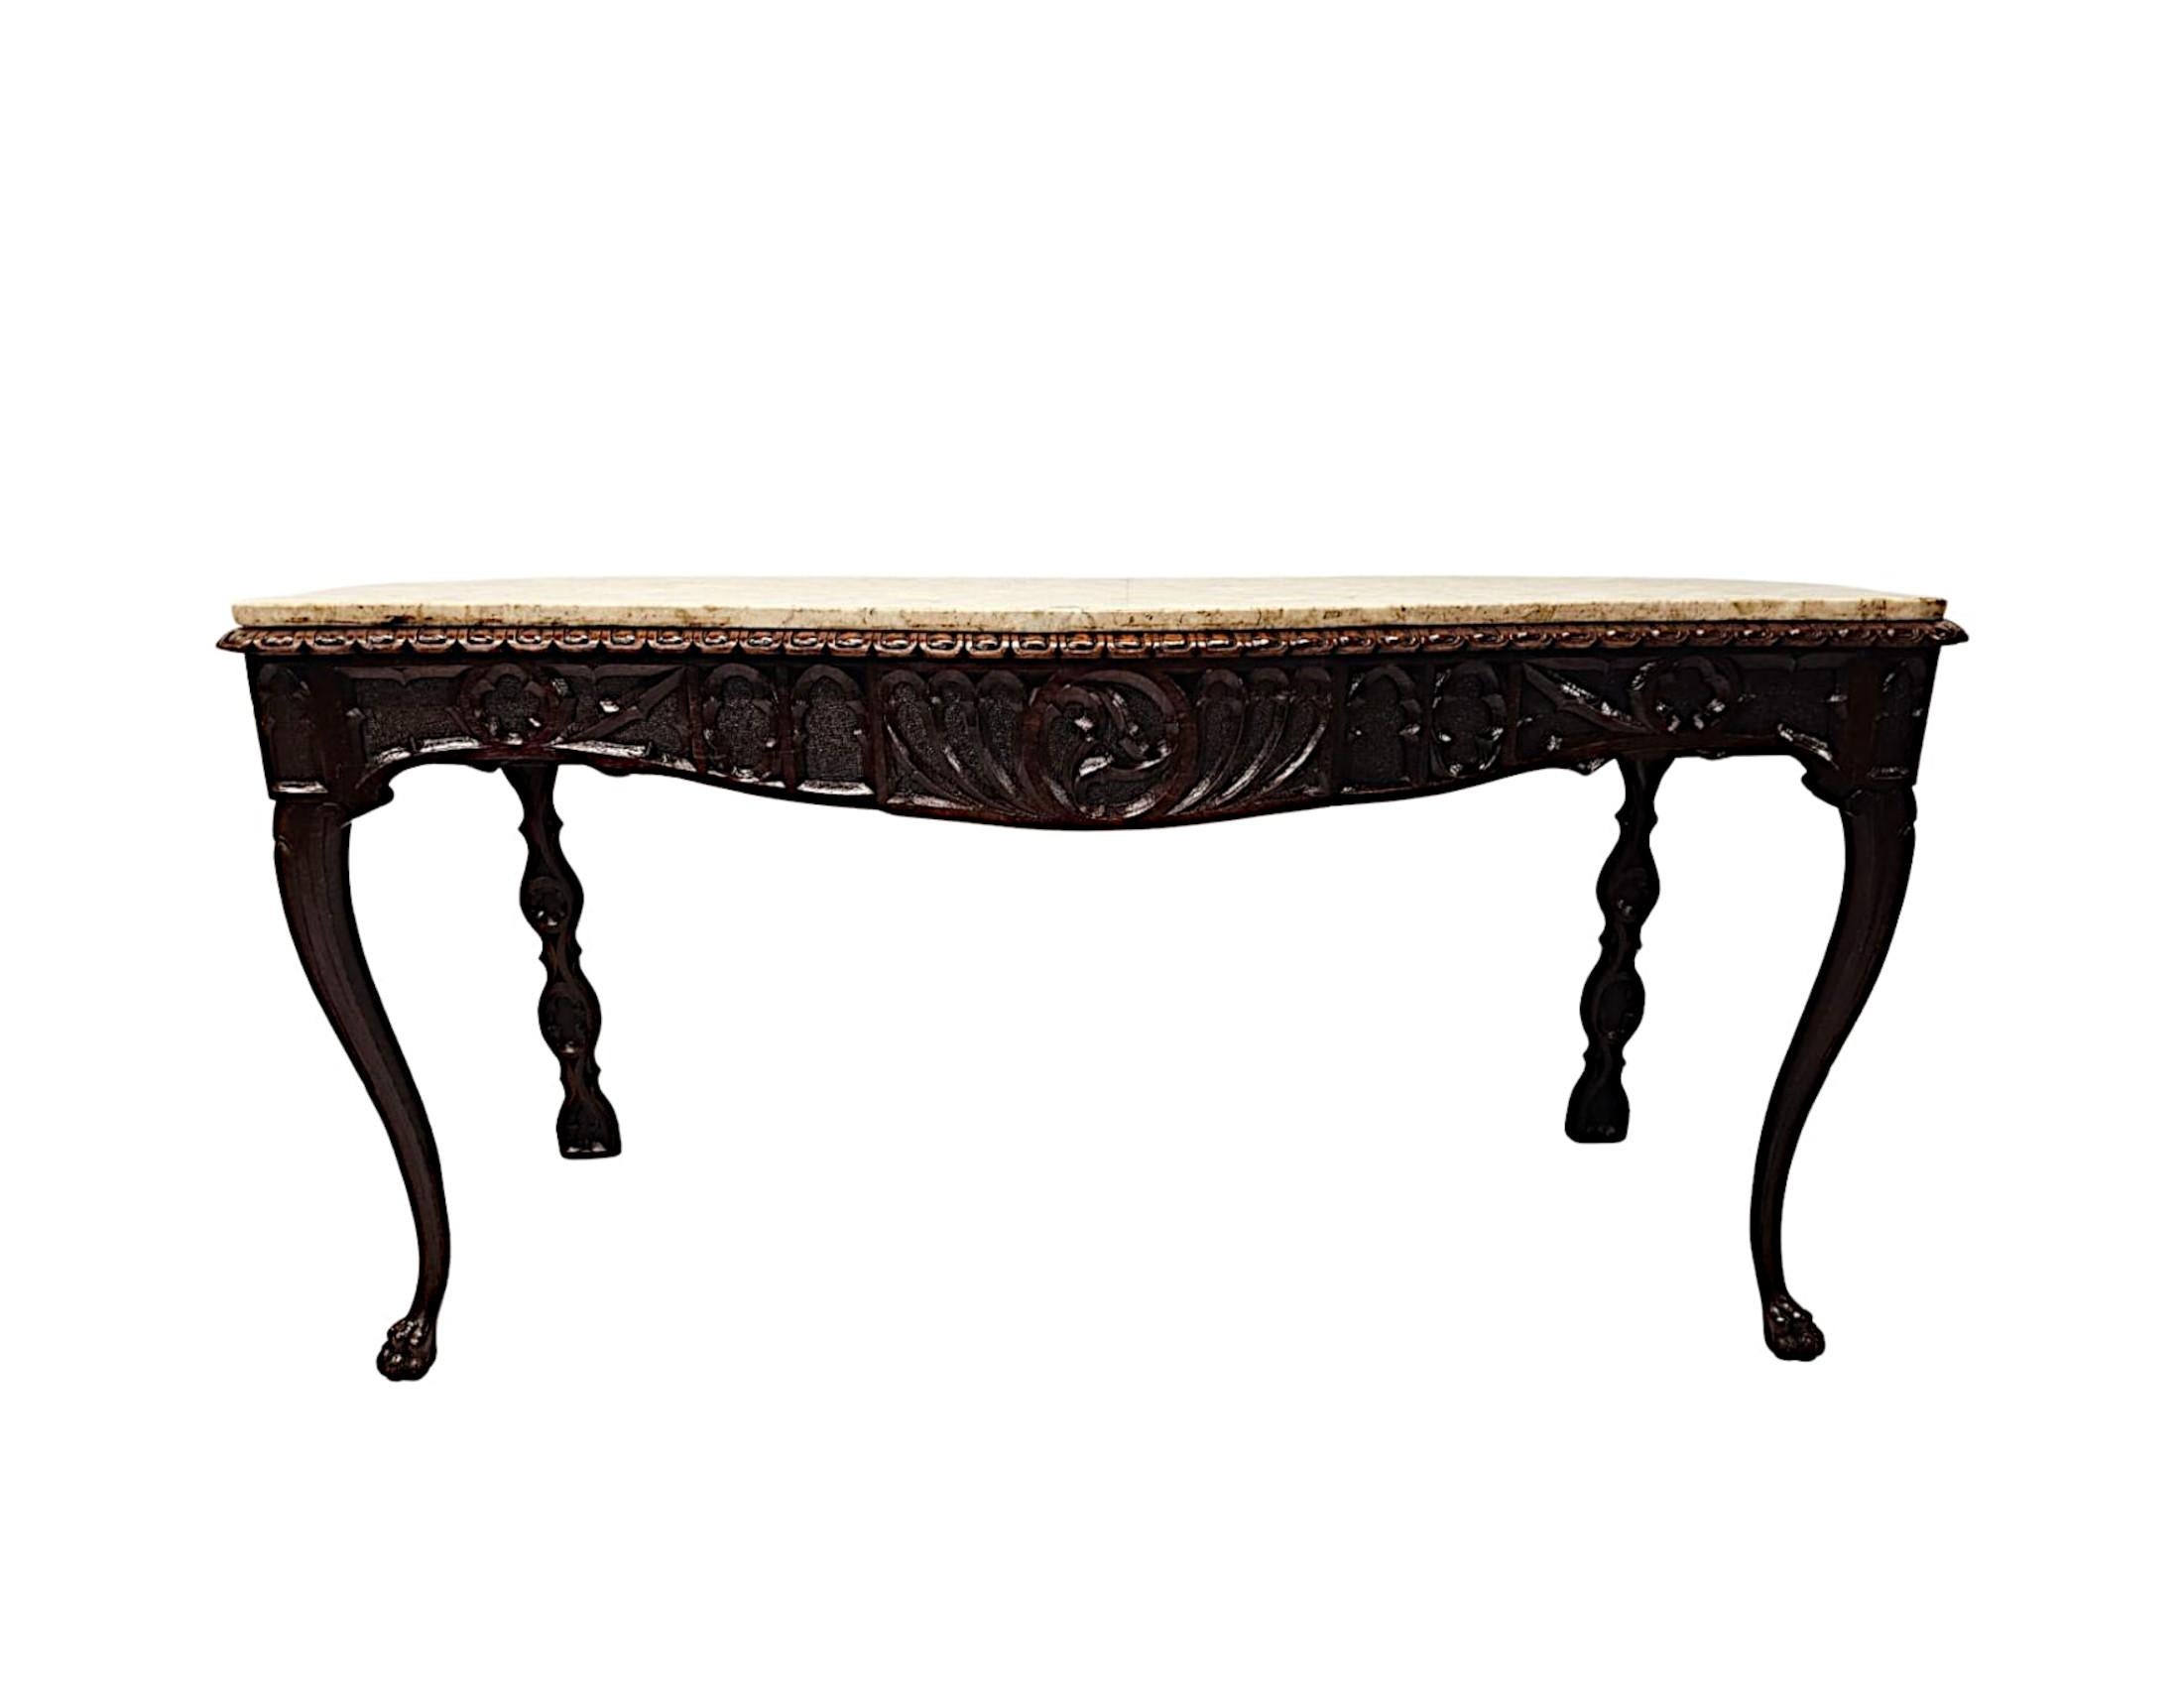 A very rare and fine 19th Century Irish Gothic oak hall or console marble top table, of exceptional quality and beautifully hand carved with rich patination, grain and with intricately carved blind fretwork detail throughout.  The gorgeous, moulded